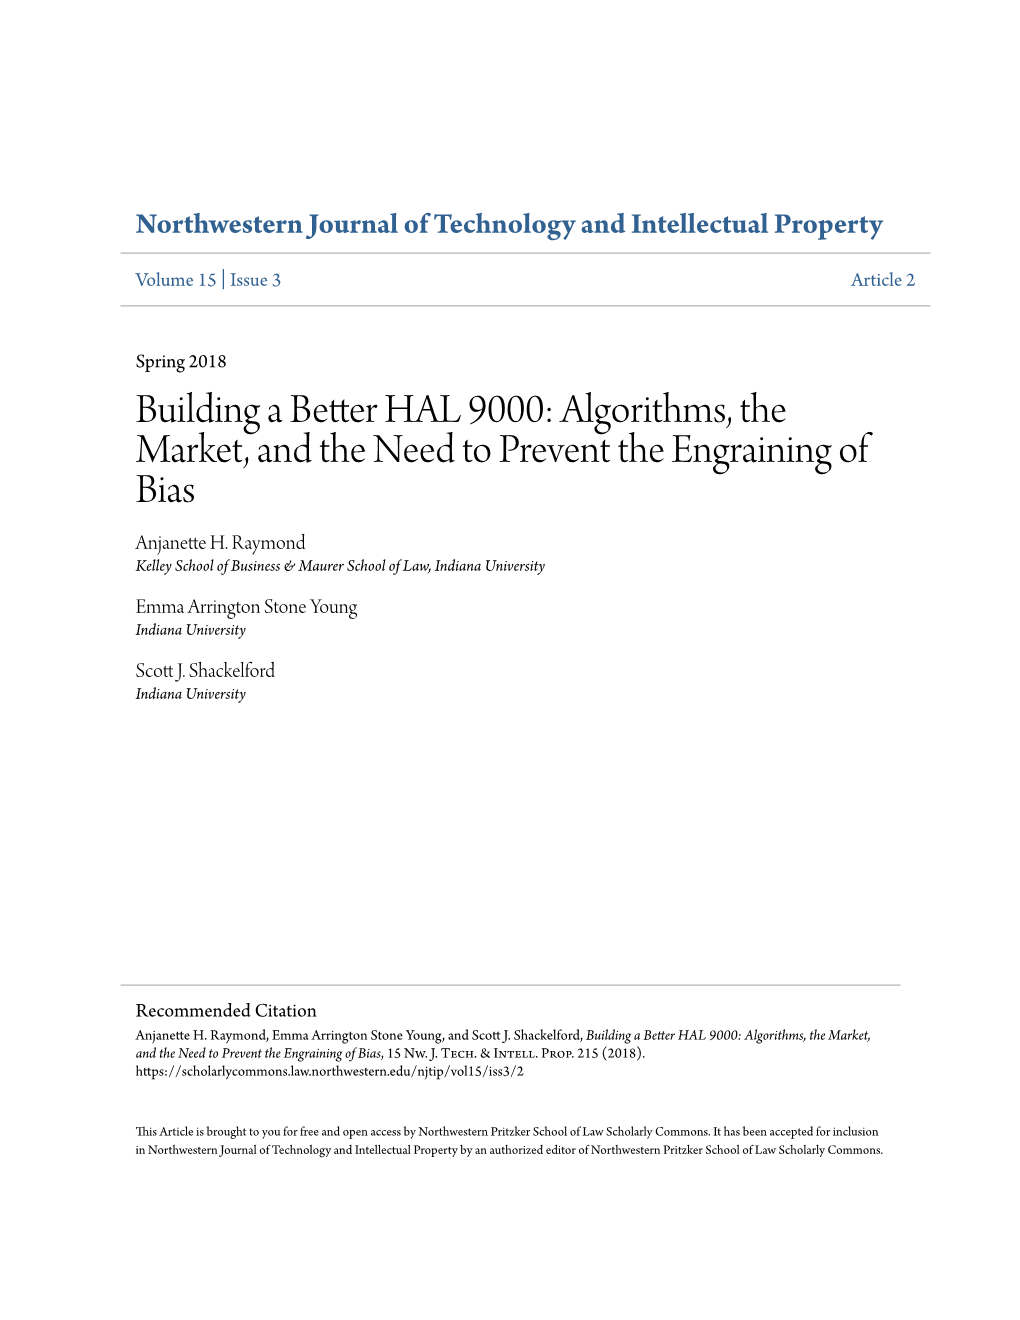 Building a Better HAL 9000: Algorithms, the Market, and the Need to Prevent the Engraining of Bias Anjanette H